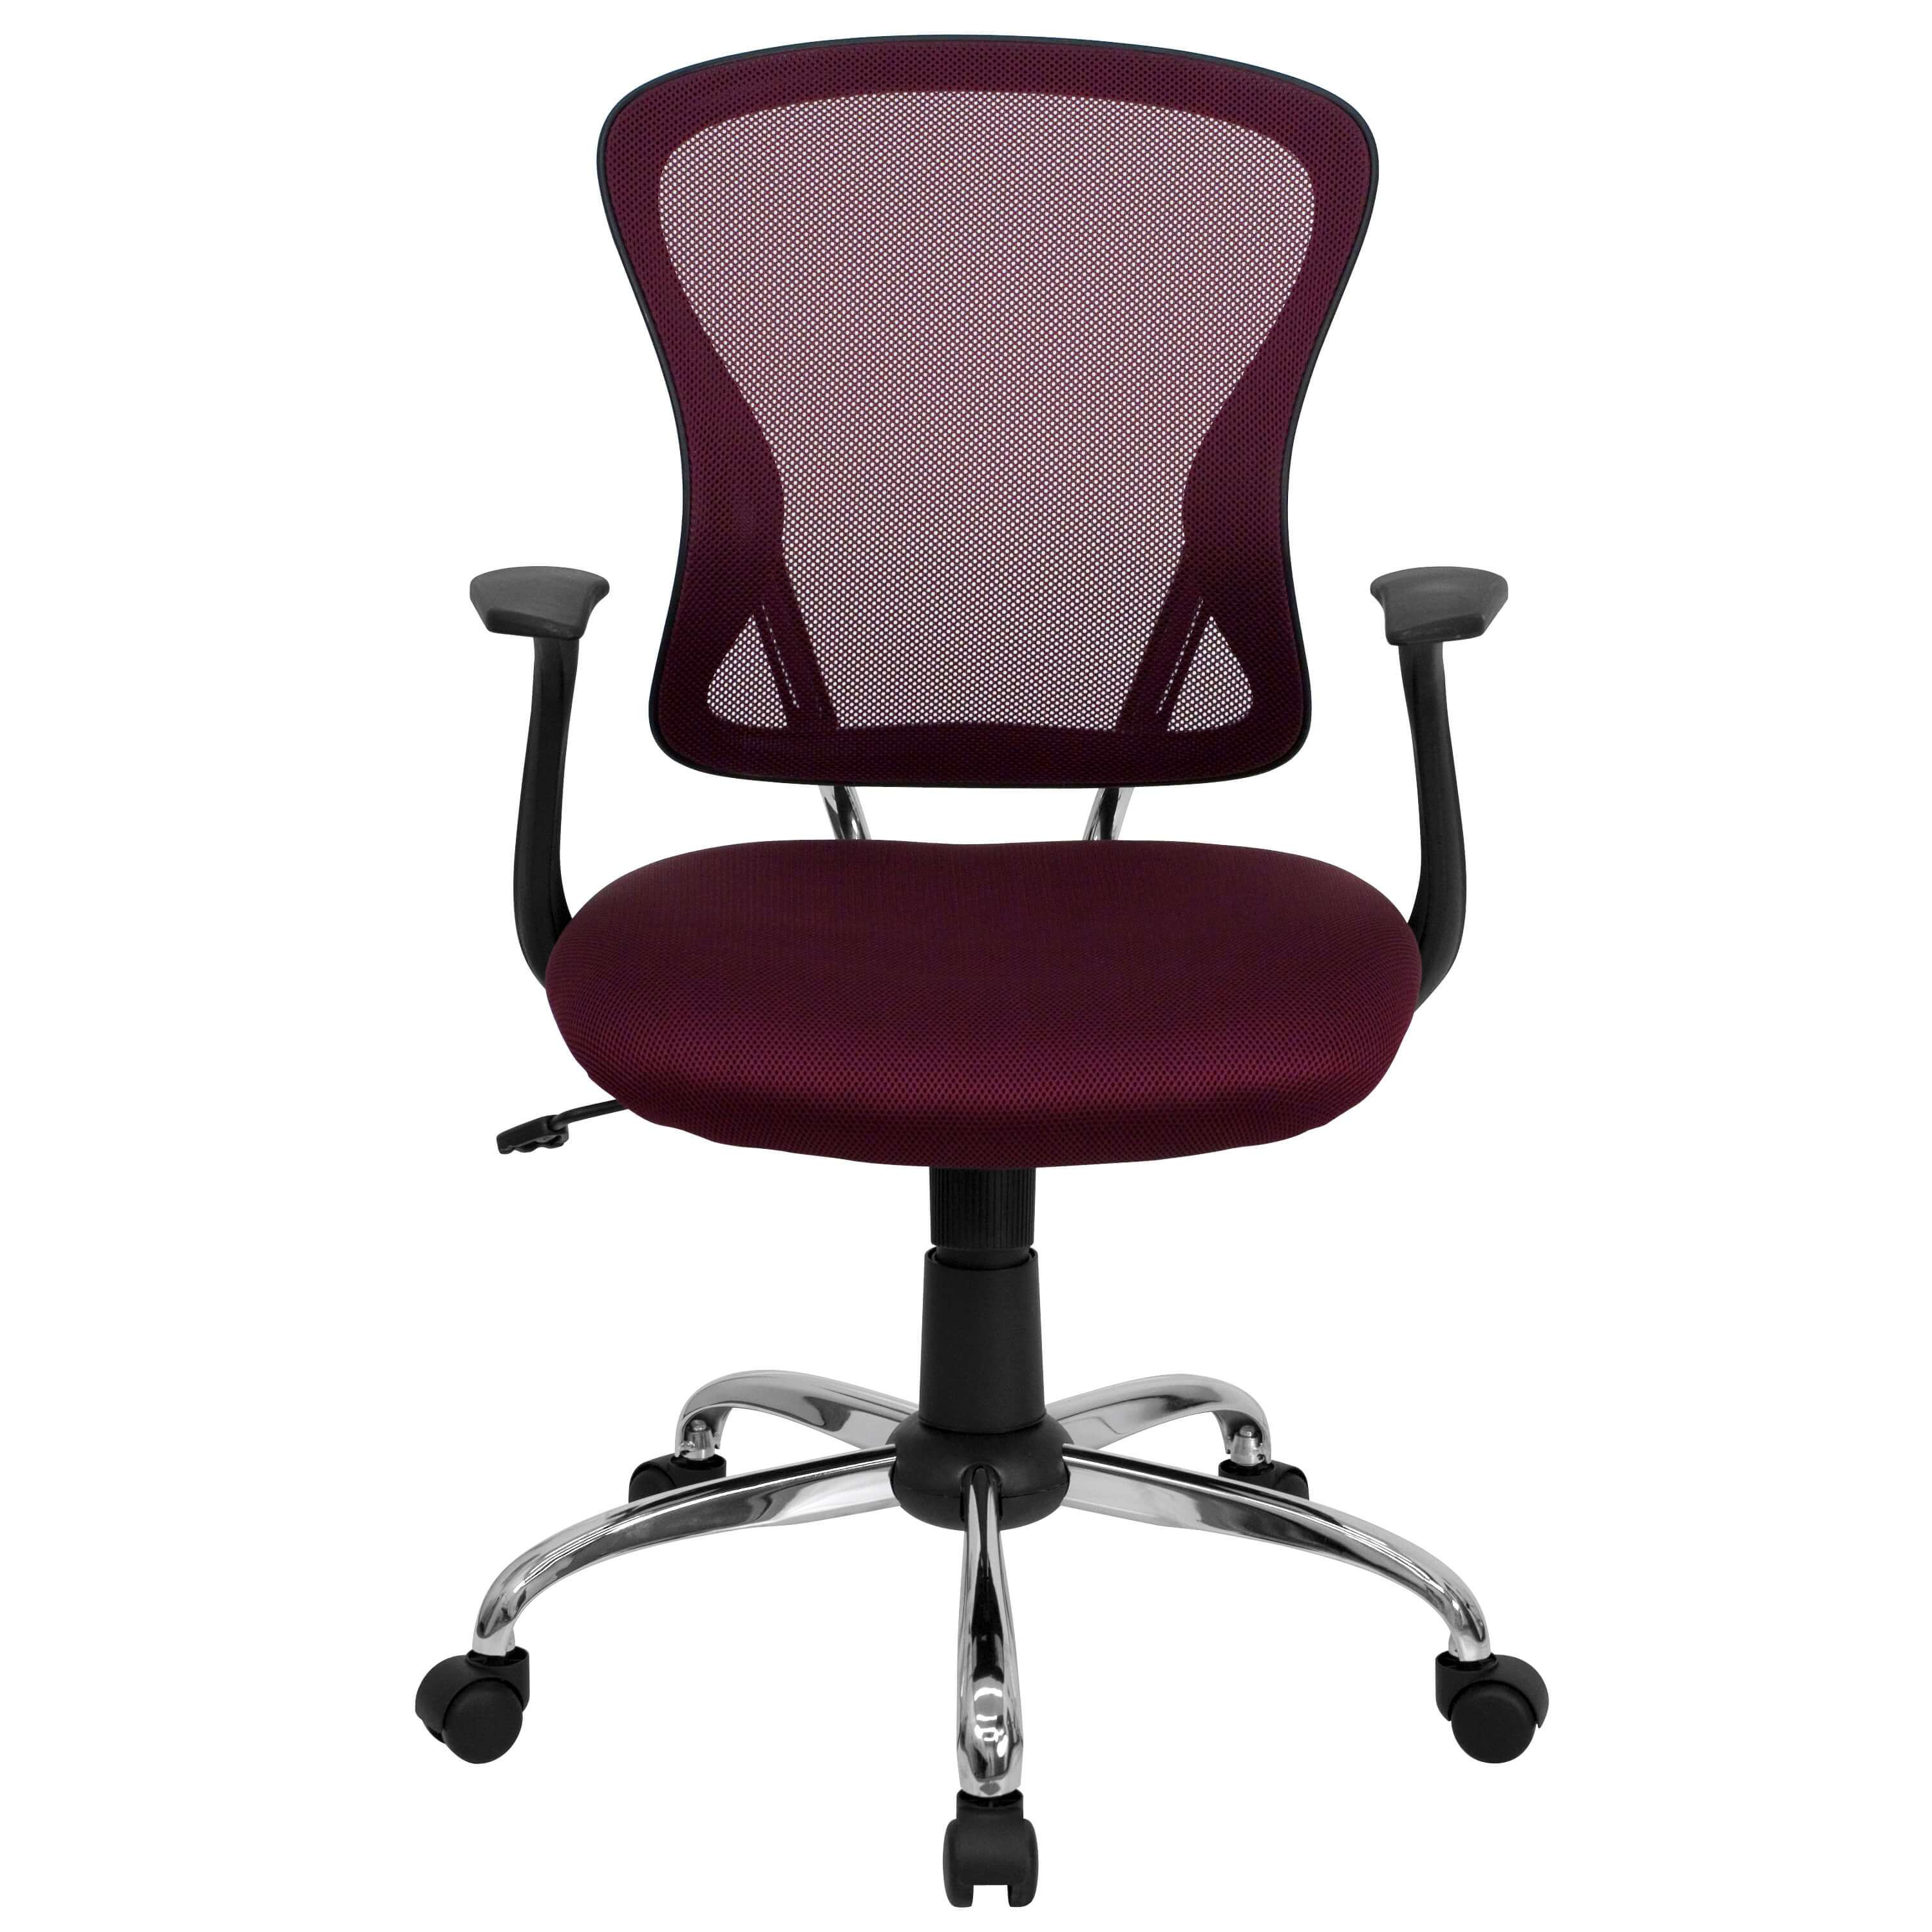 Colorful desk chairs CUB H 8369F ALL BY GG FLA